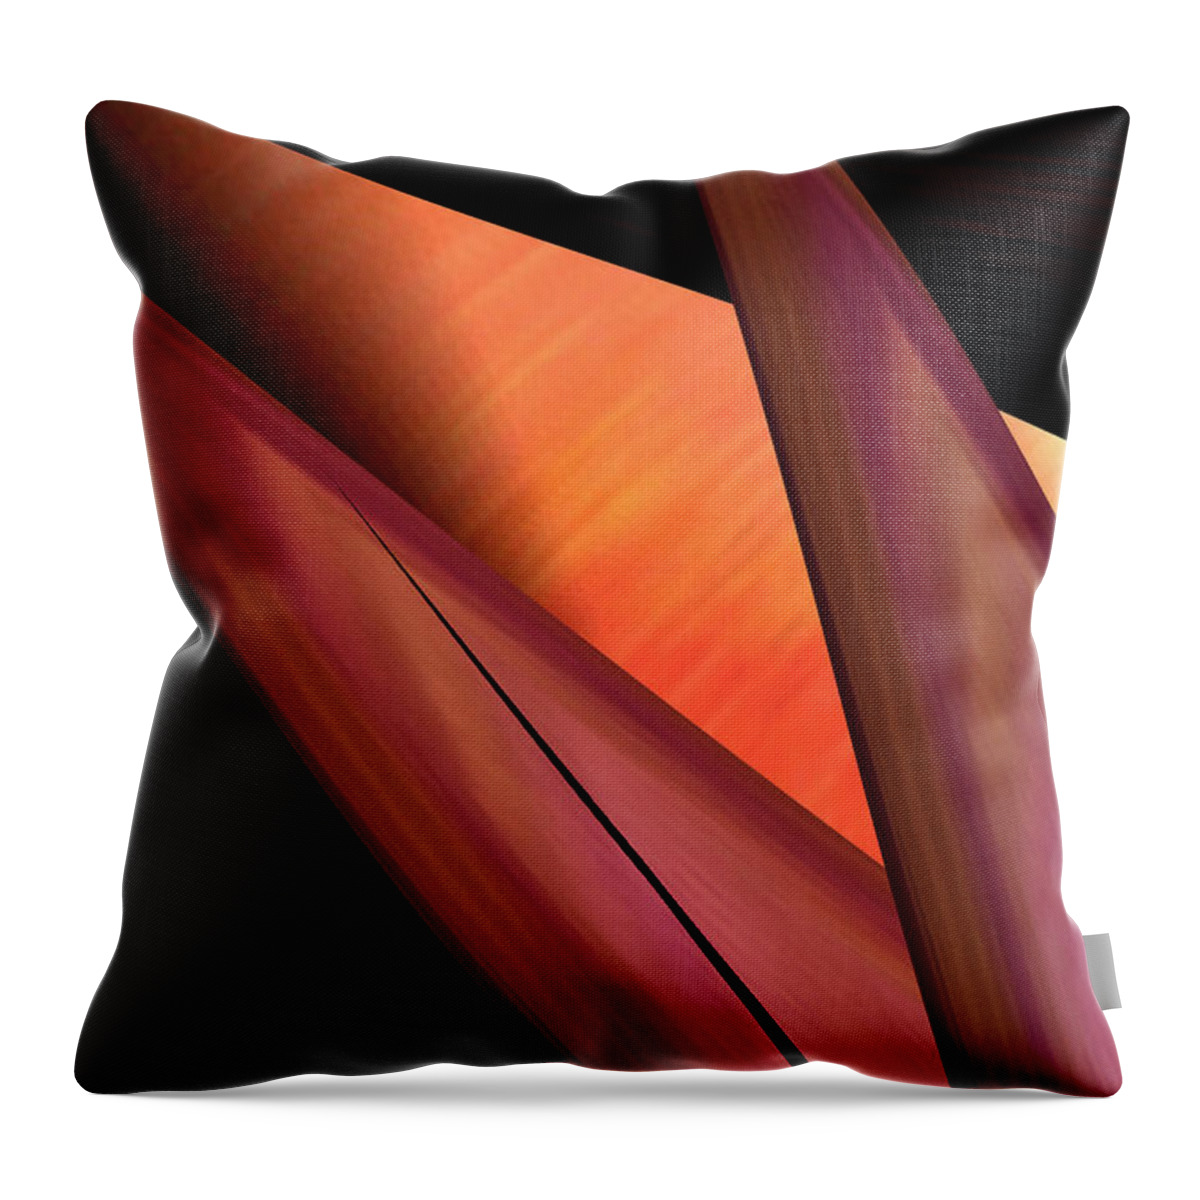 Digital_art Throw Pillow featuring the painting Abstract 455 by Gerlinde Keating - Galleria GK Keating Associates Inc